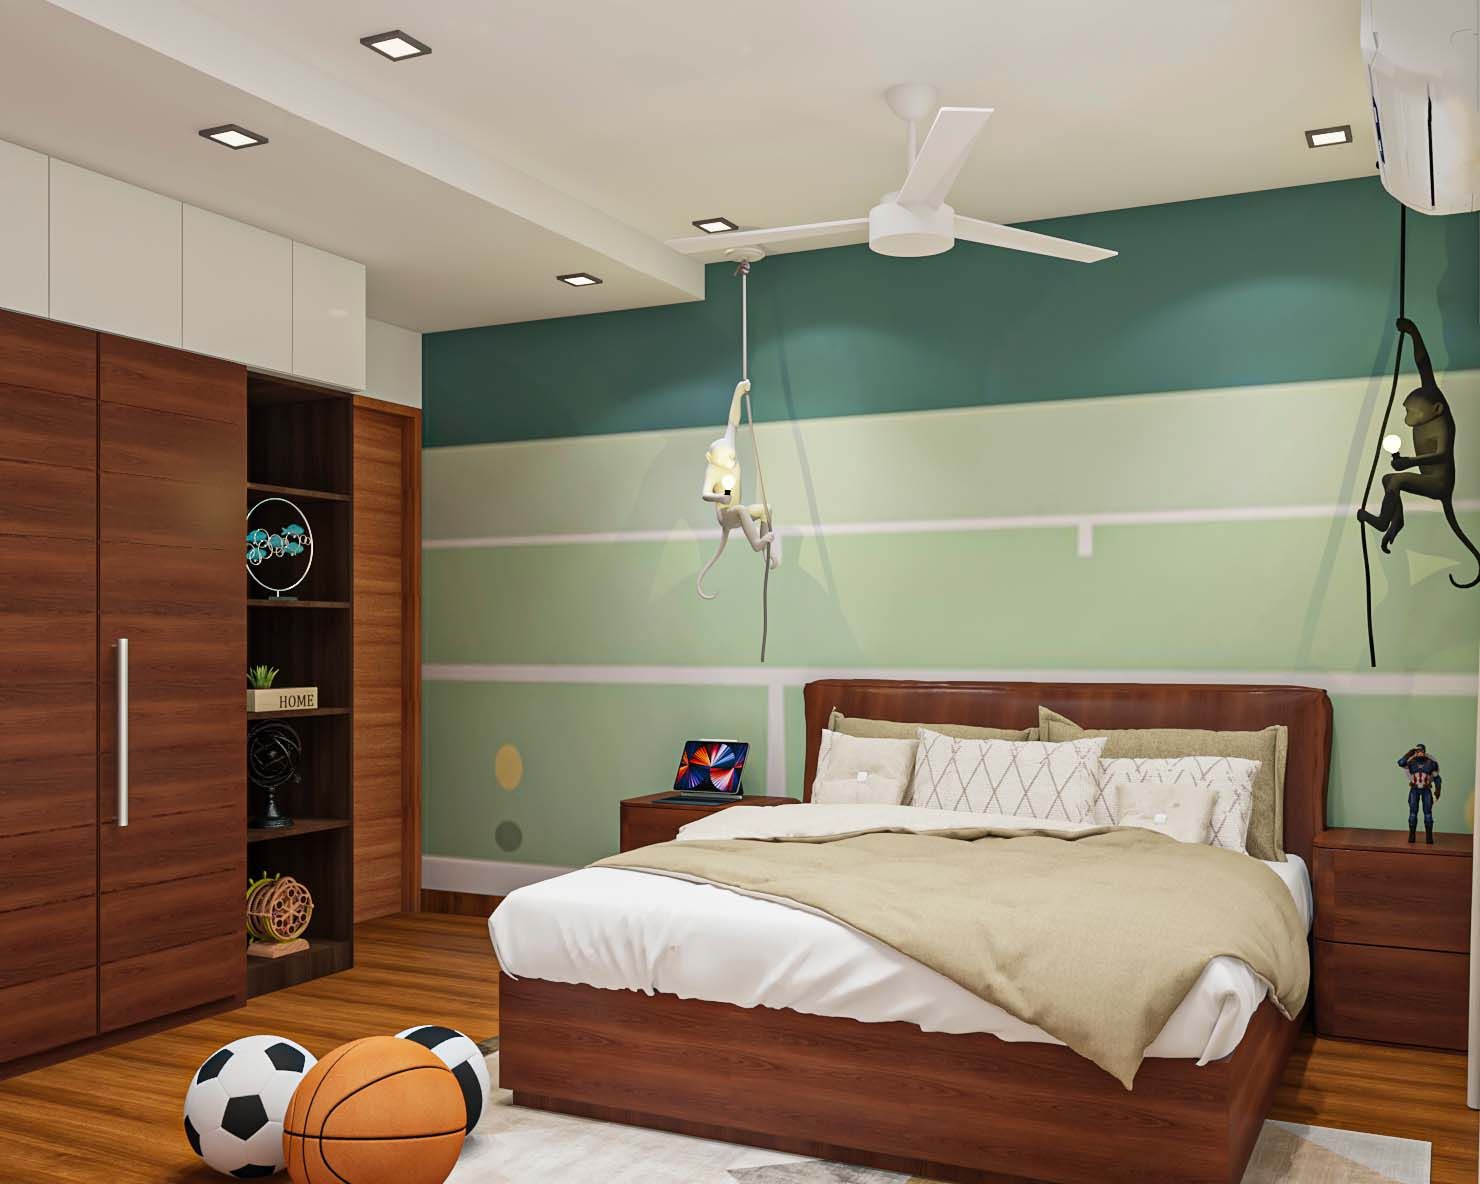 Classic Spacious Boy's Room Design In Green